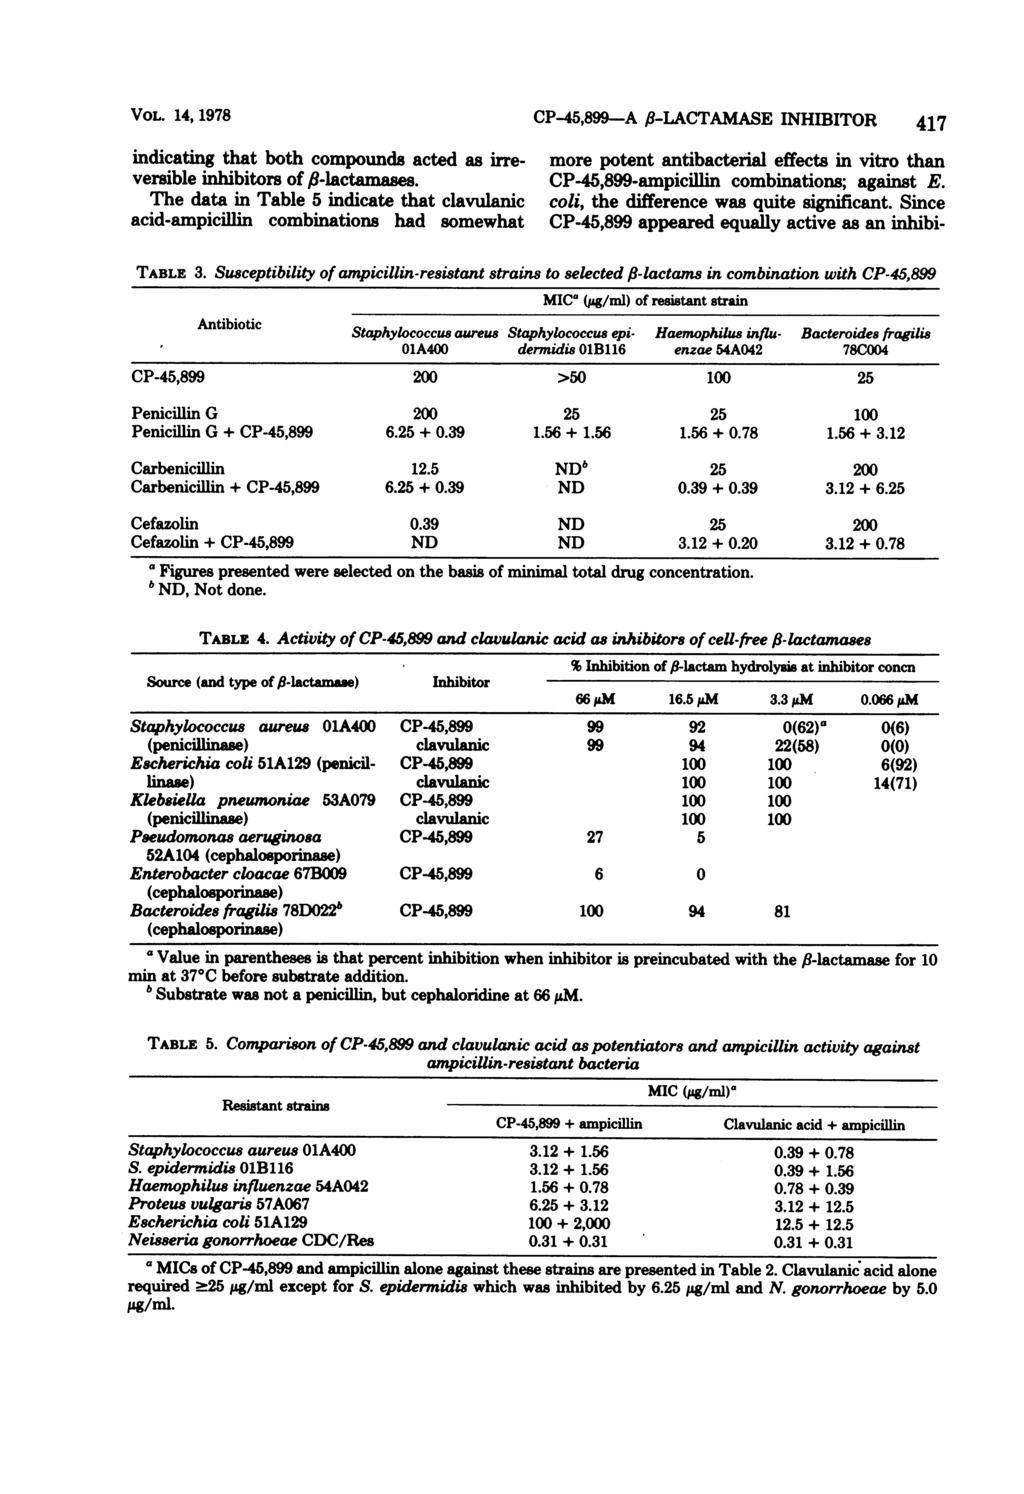 VOL. 14, 1978 CP-45,899-A f8-lactamase INHIBITOR 417 indicating that both compounds acted as irre- more potent antibacterial effects in vitro than versible inhibitors of /-lactamases.